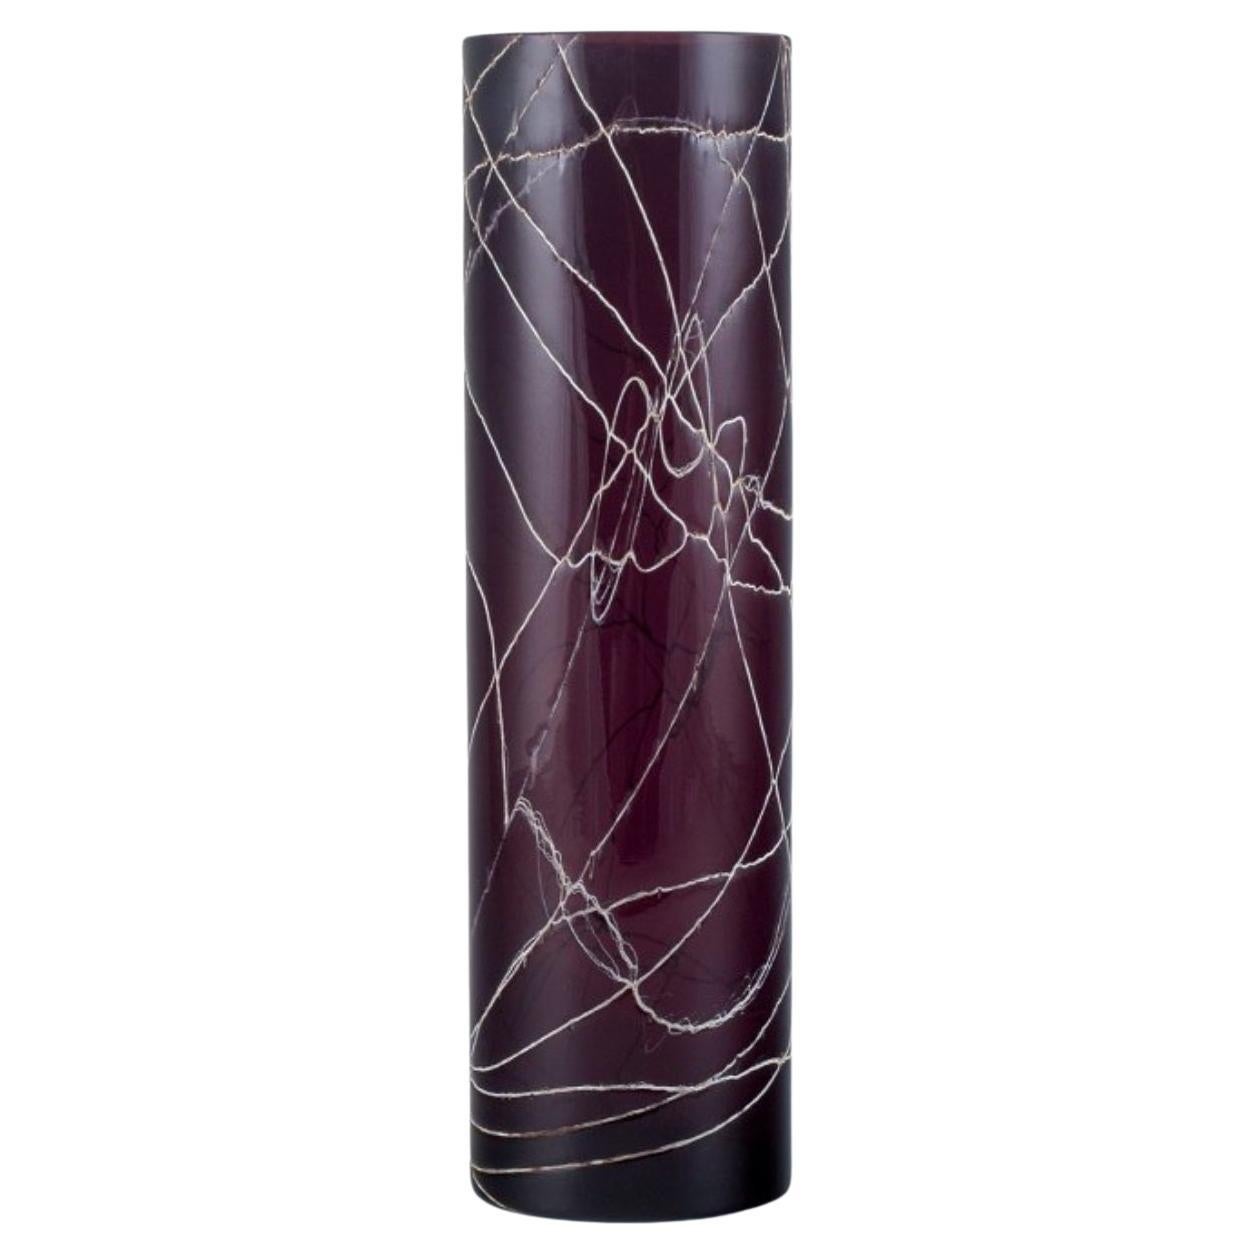 Purple Art Glass Vase Decorated with Silvery Threads, Mid-20th C For Sale